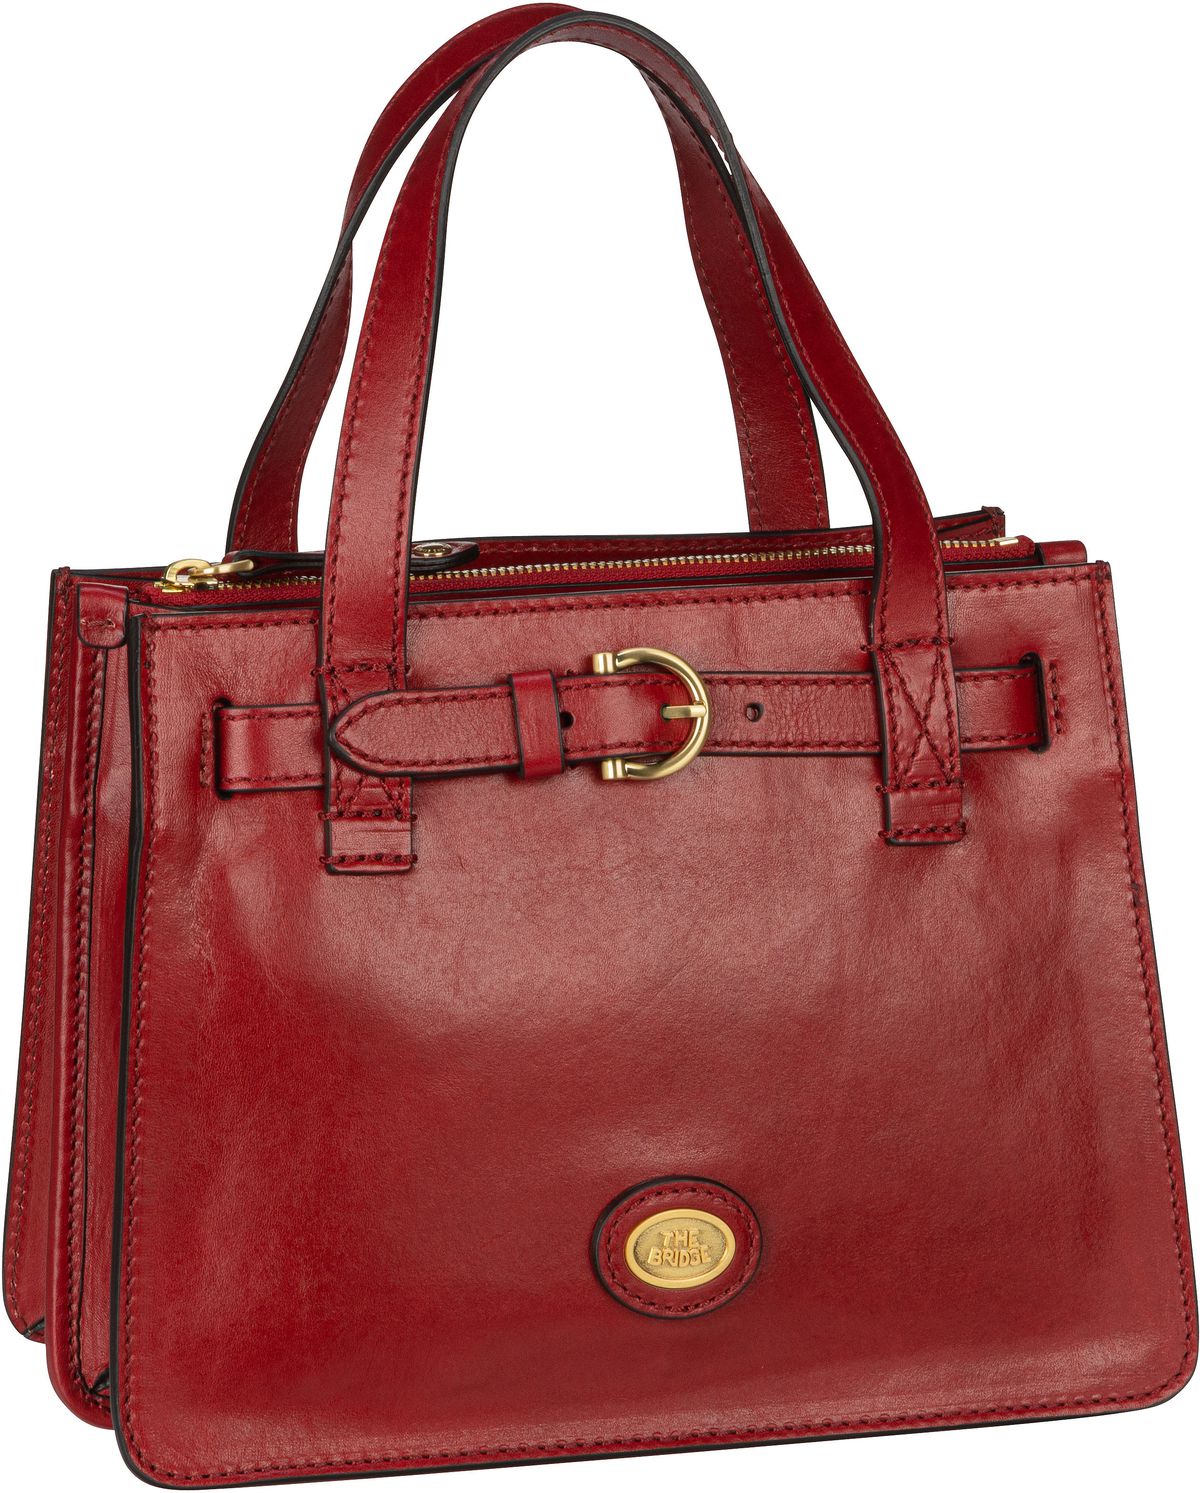 The Bridge Biba Double Function - Red Currant/Gold